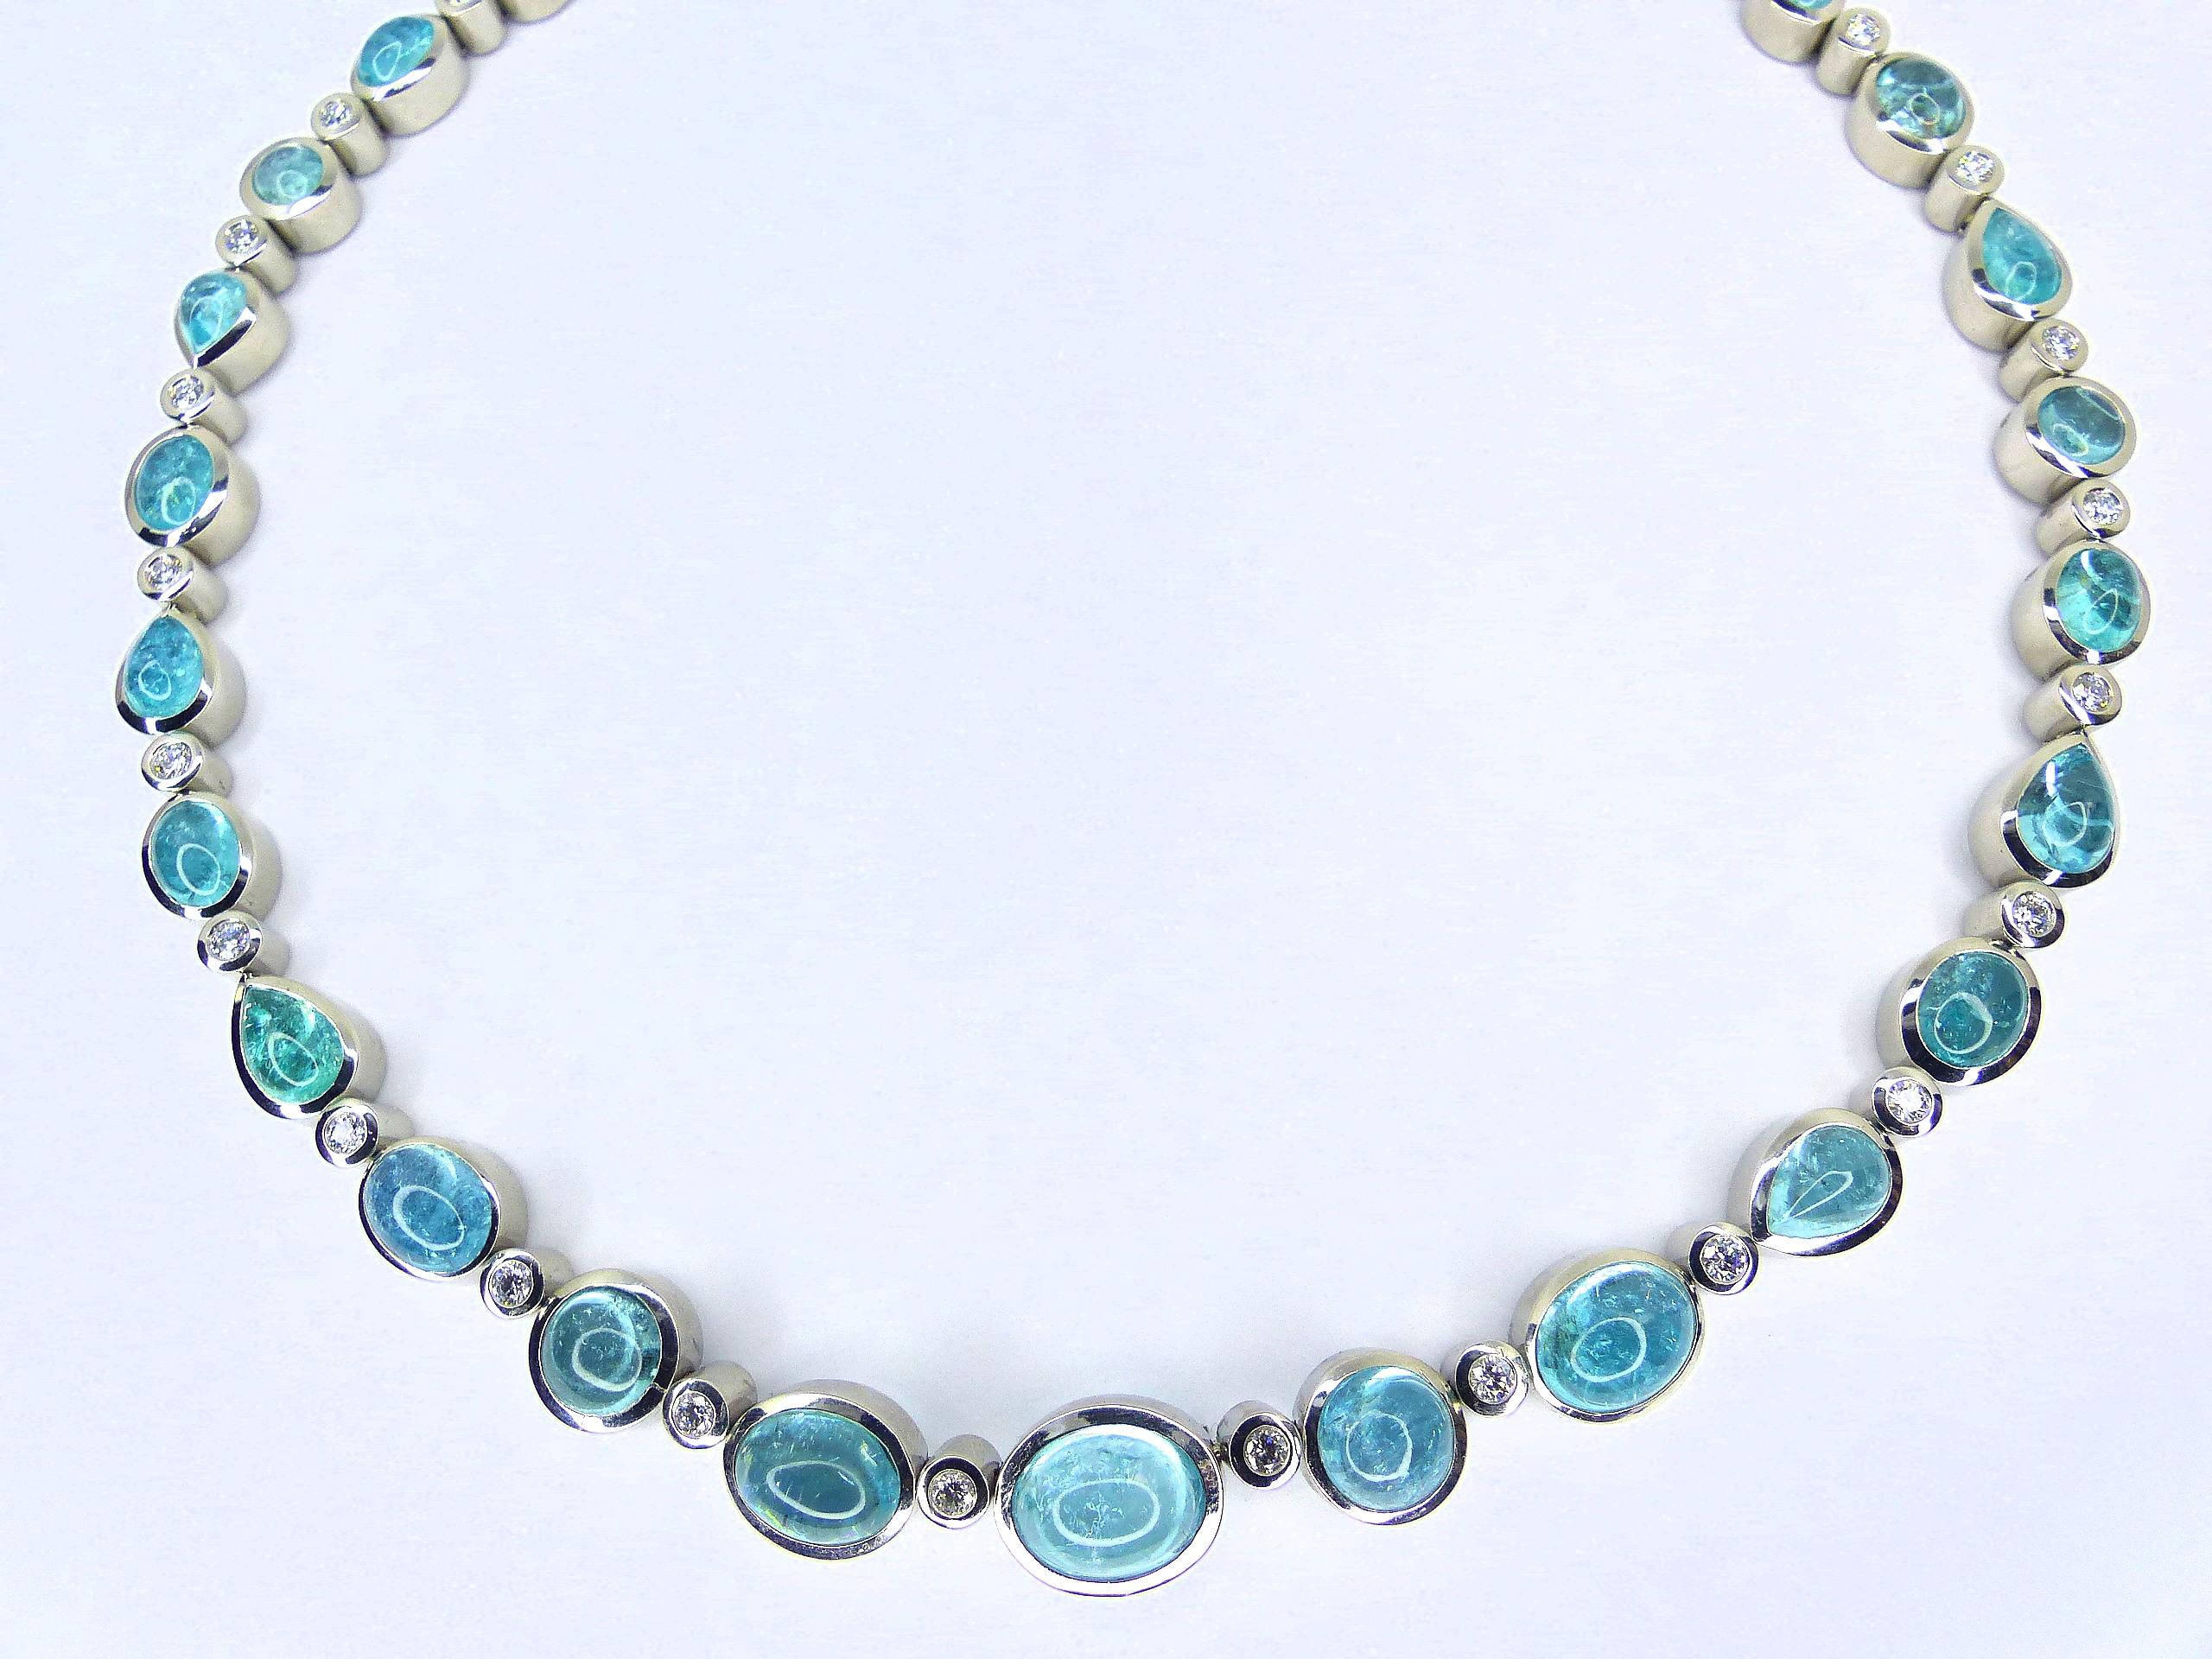 Cabochon Necklace in Platinum with 29 Paraiba Tourmaline Cabouchons and 46 Diamonds